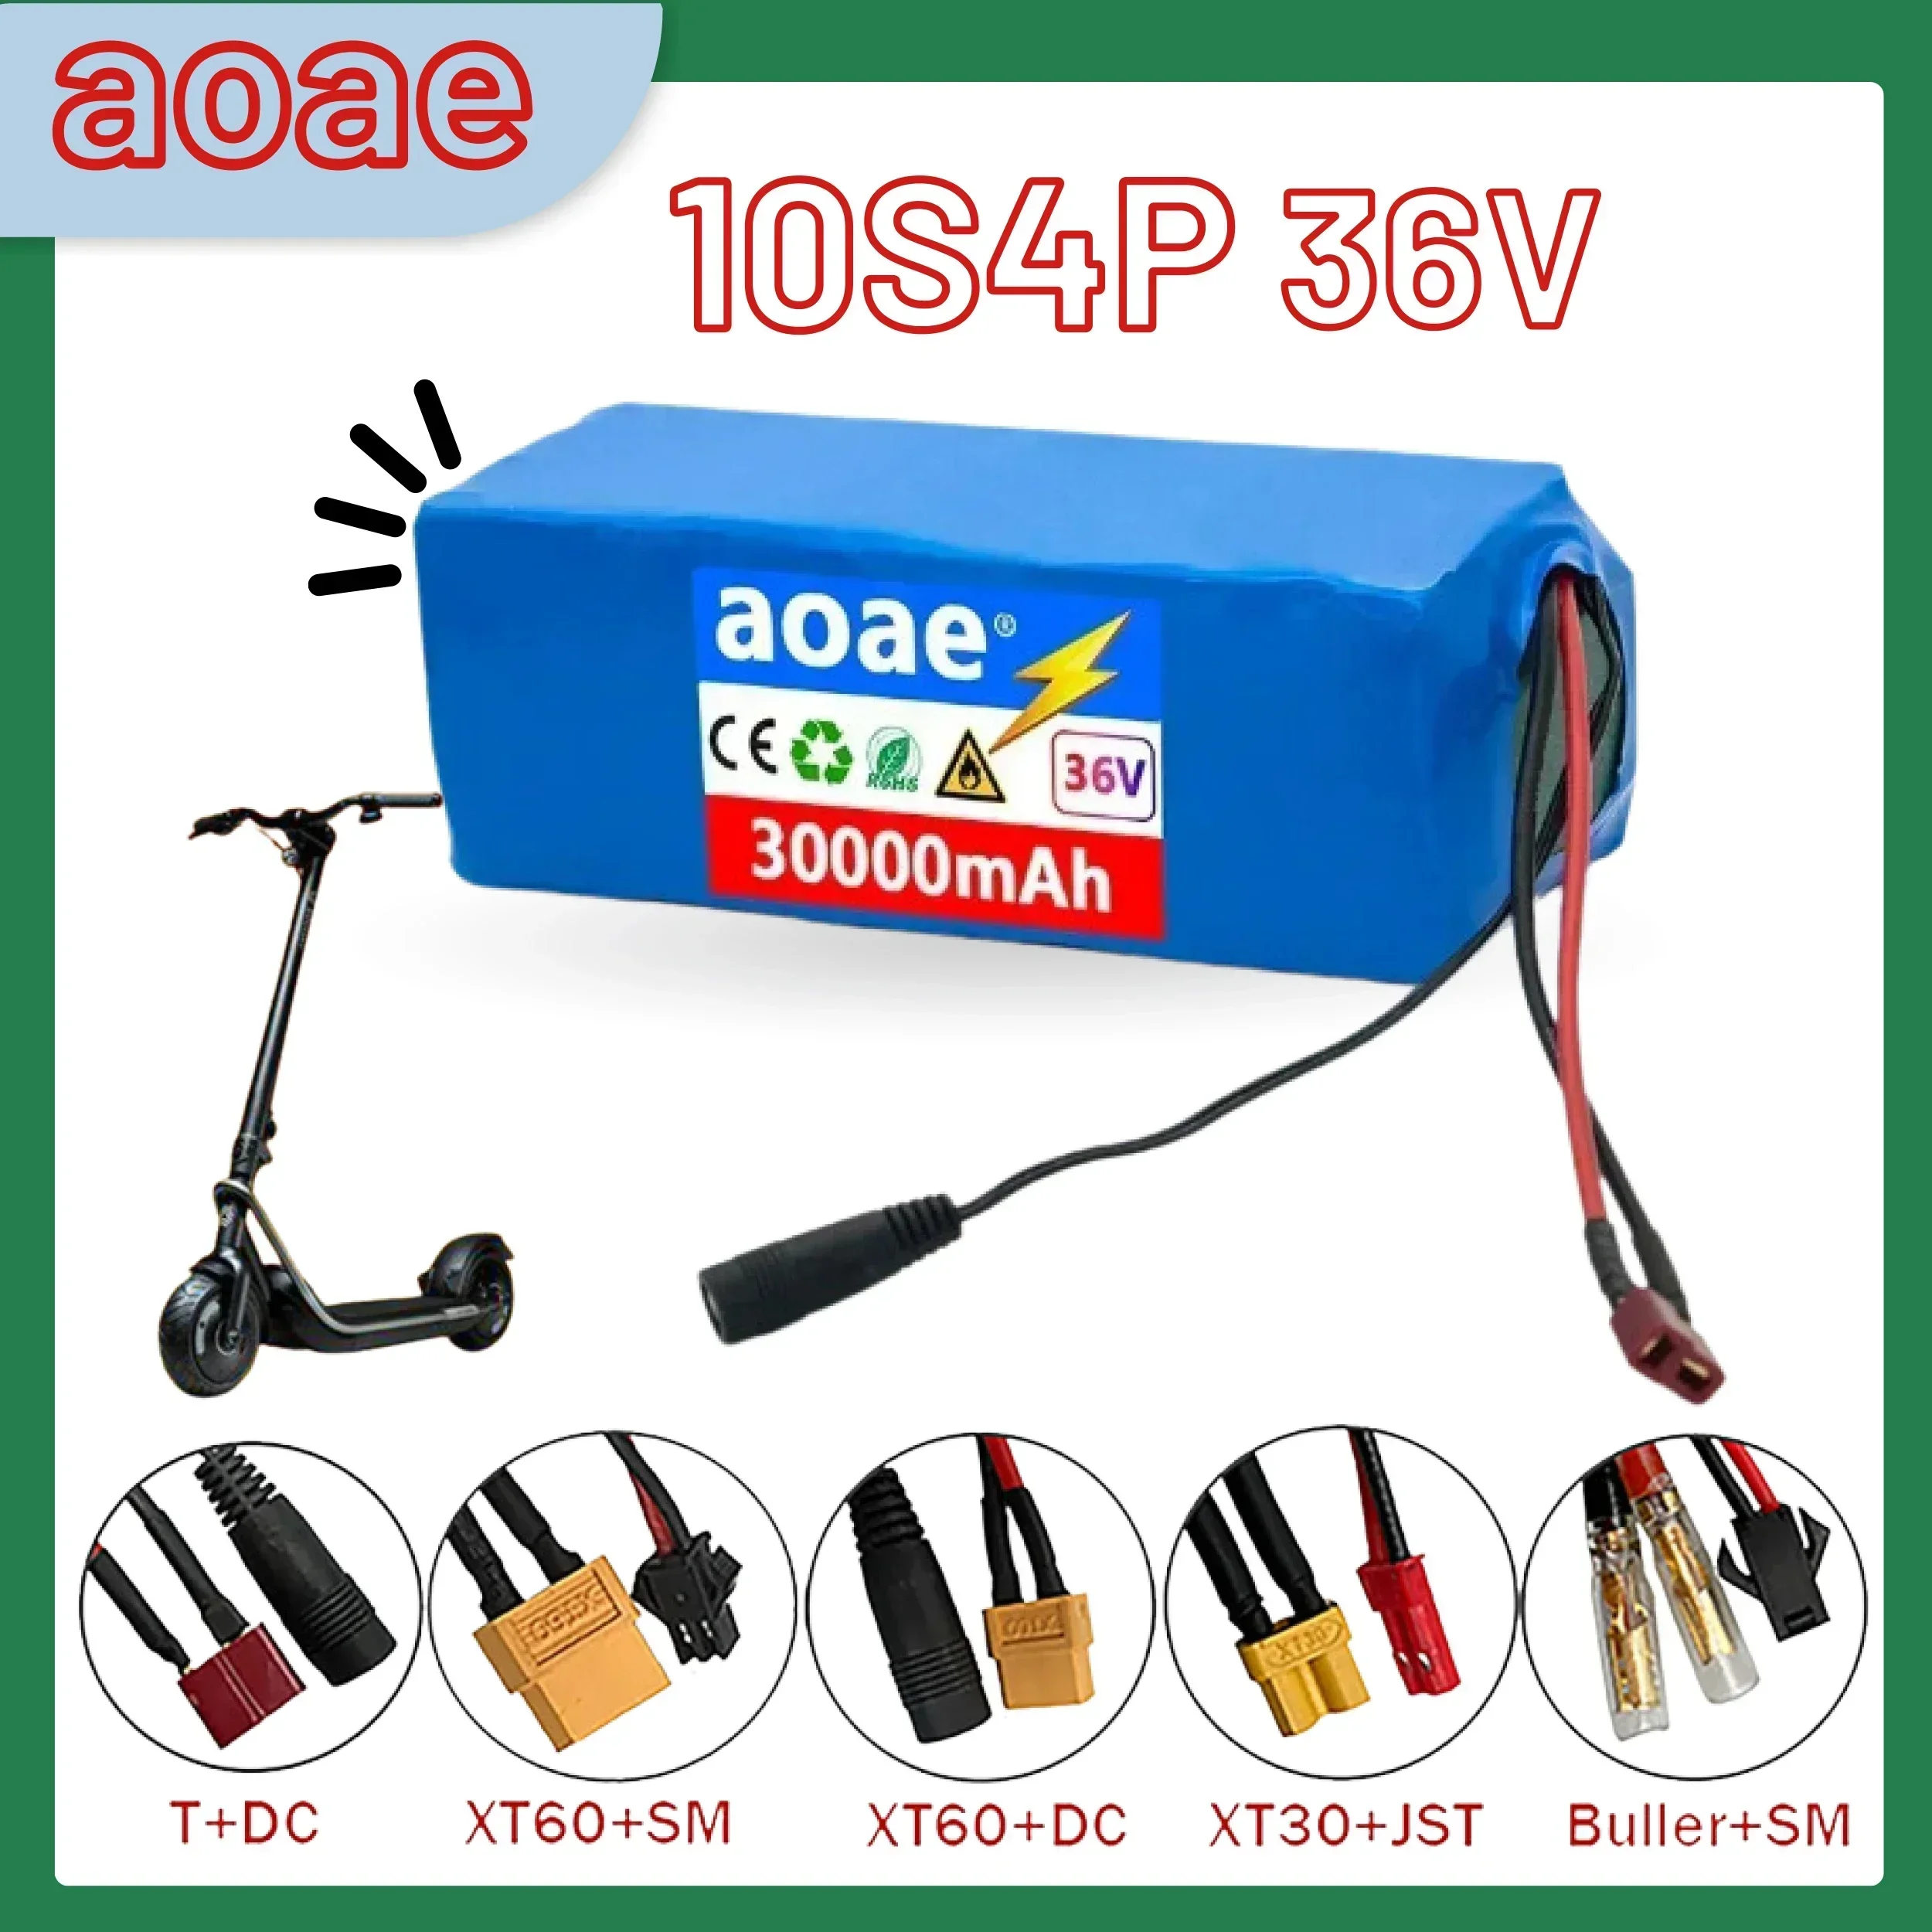 

36V 10S4P 30Ah battery pack 500W high power battery 42V 30000mAh Ebike electric bicycle BMS 42v battery with xt60 plug